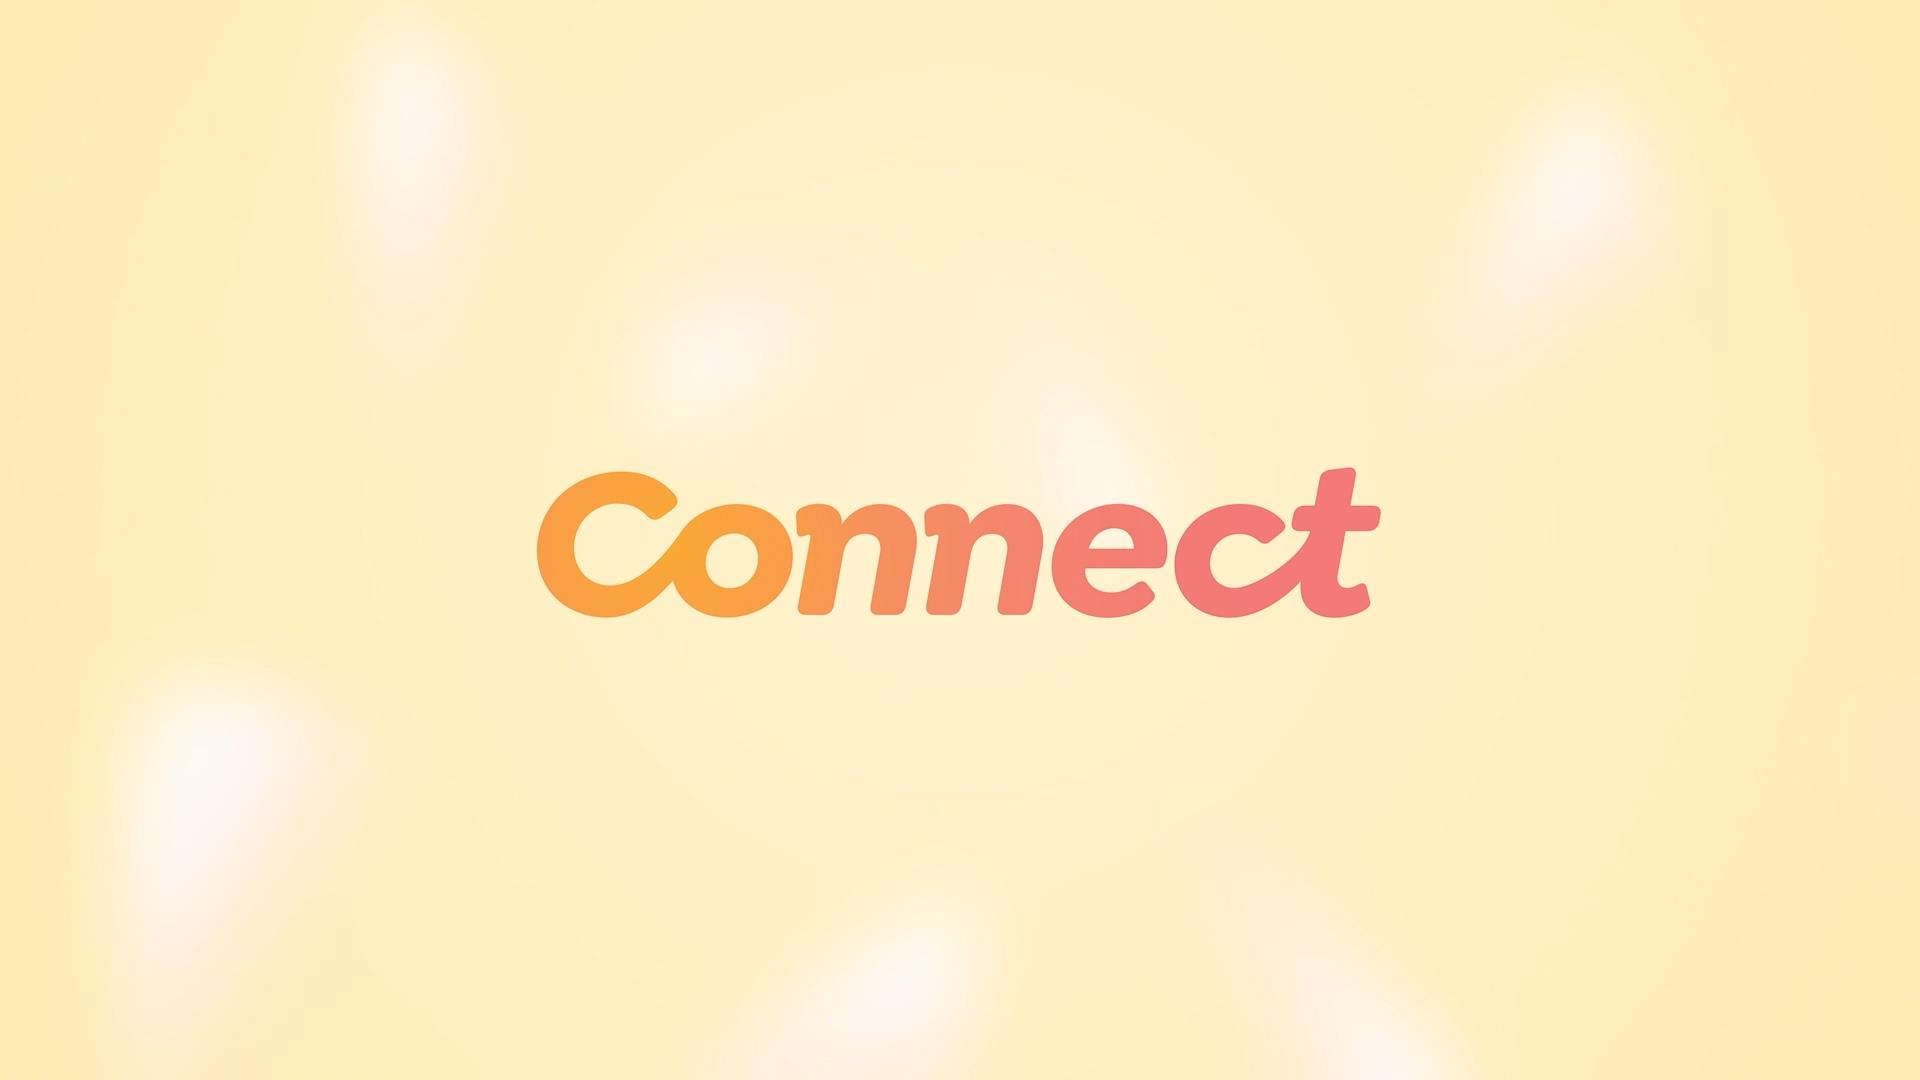 Connect 1